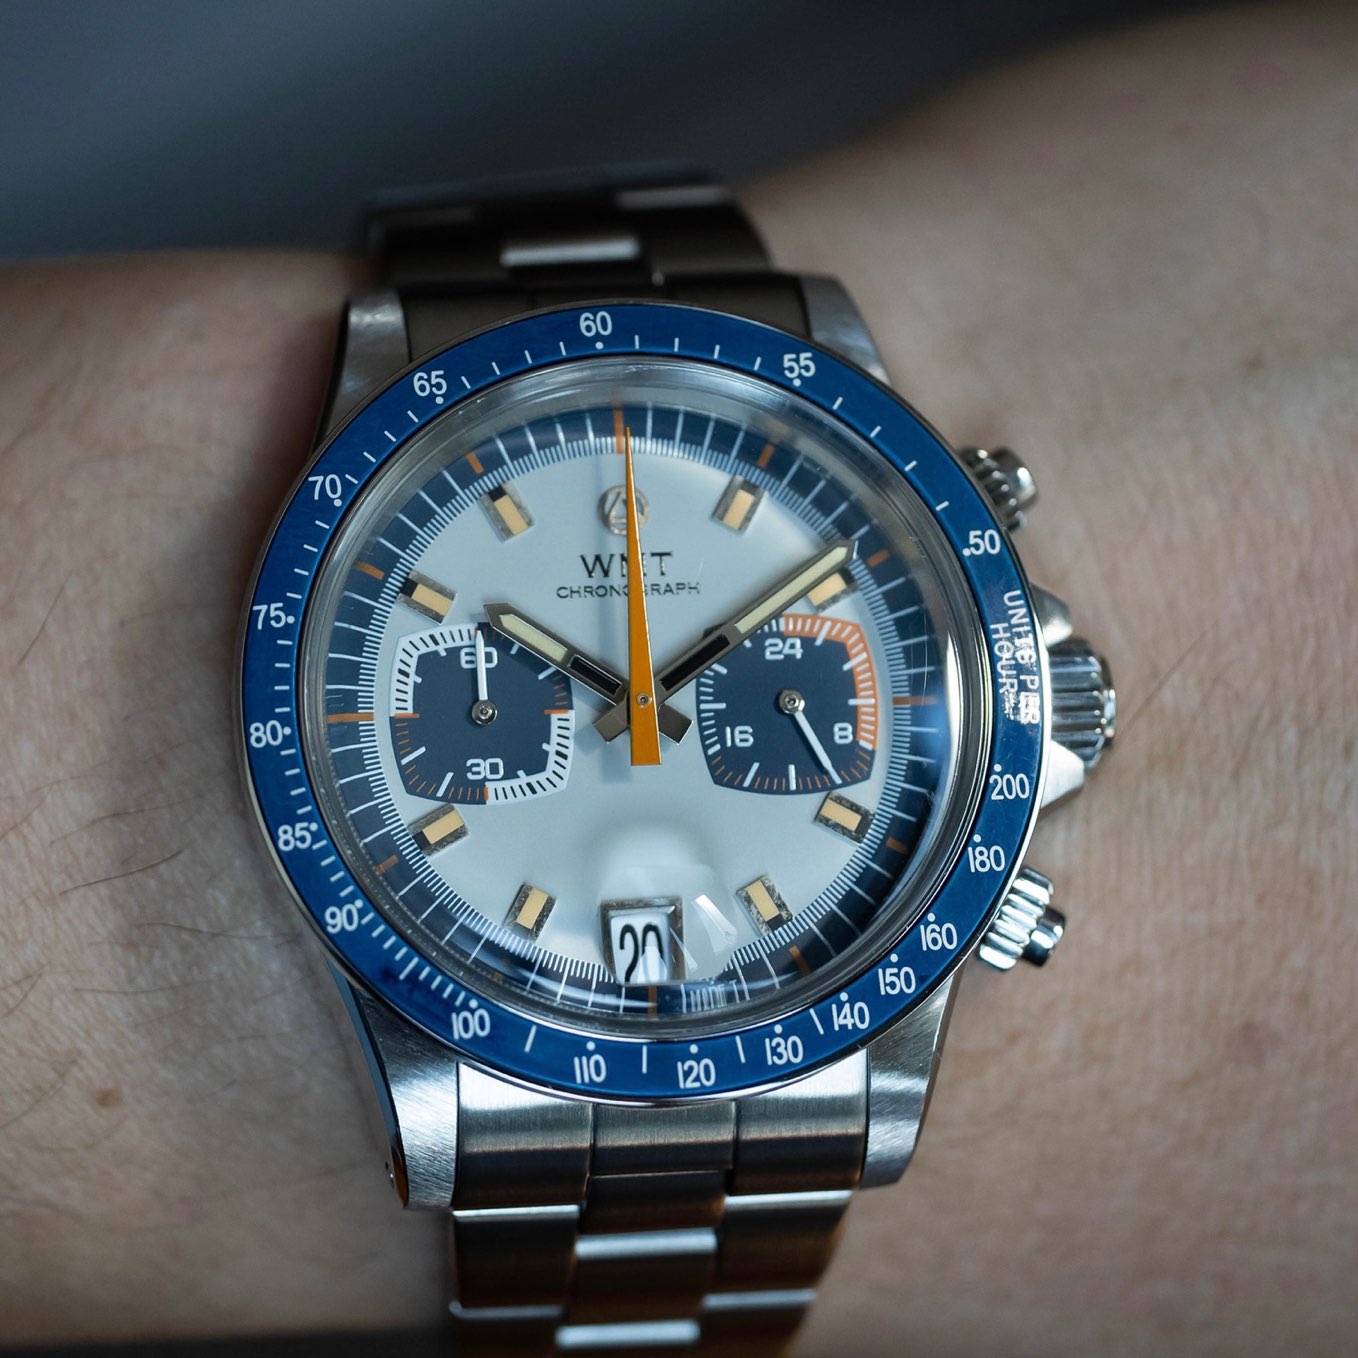 WMT WATCH] [Reservation sale product] Monza - Blue Dial / Limited